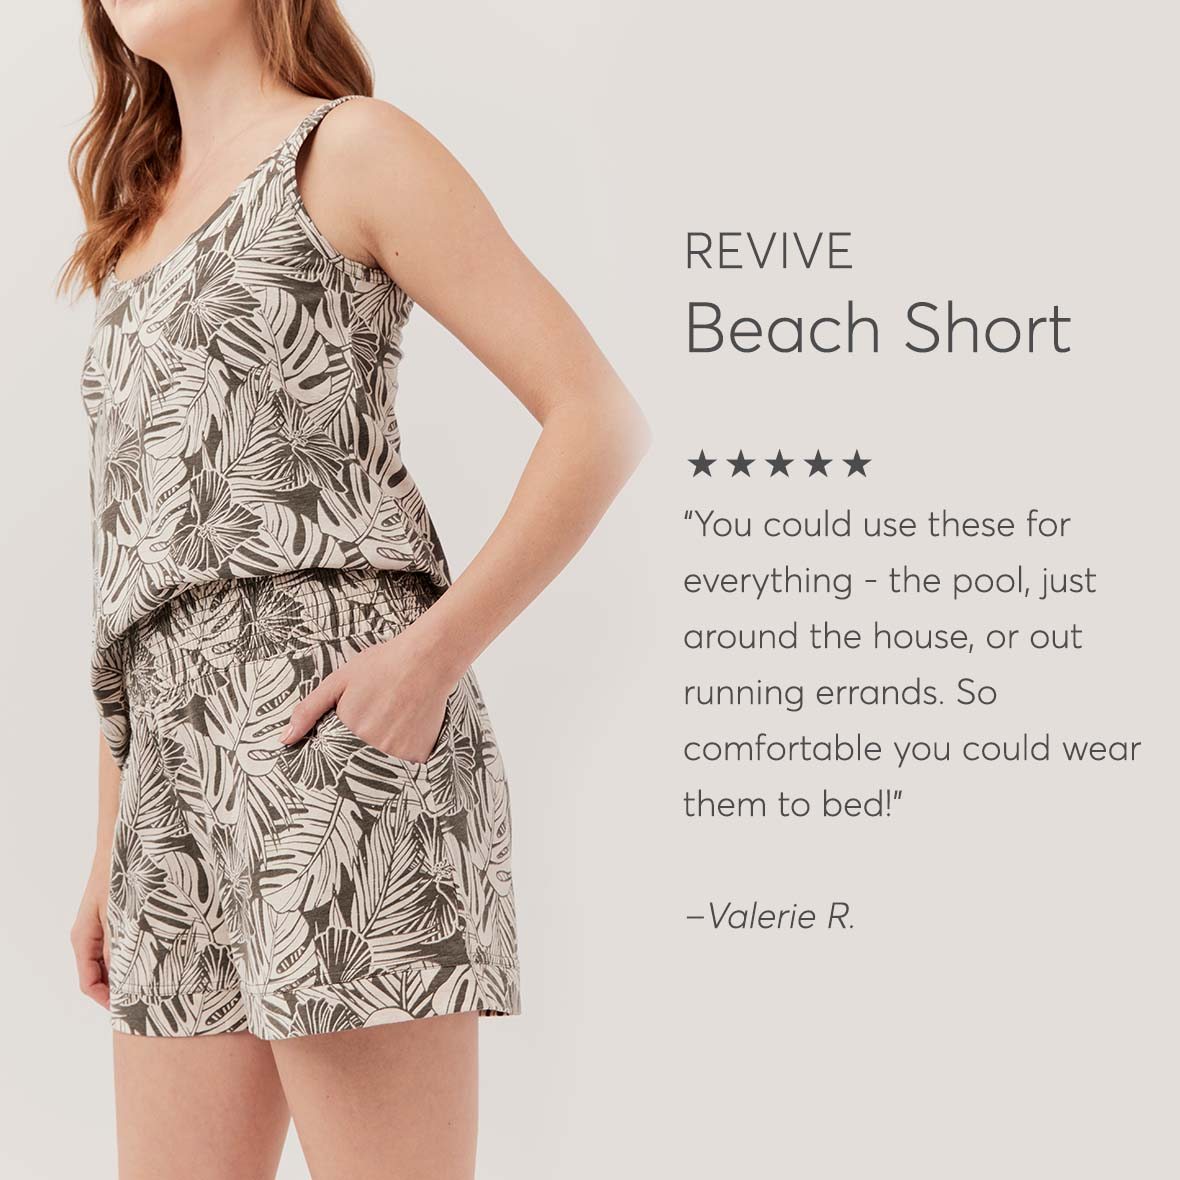 Revive Beach Short: You could use these for everything - the pool, just around the house, or out running errands. So comfortable you could wear them to bed!